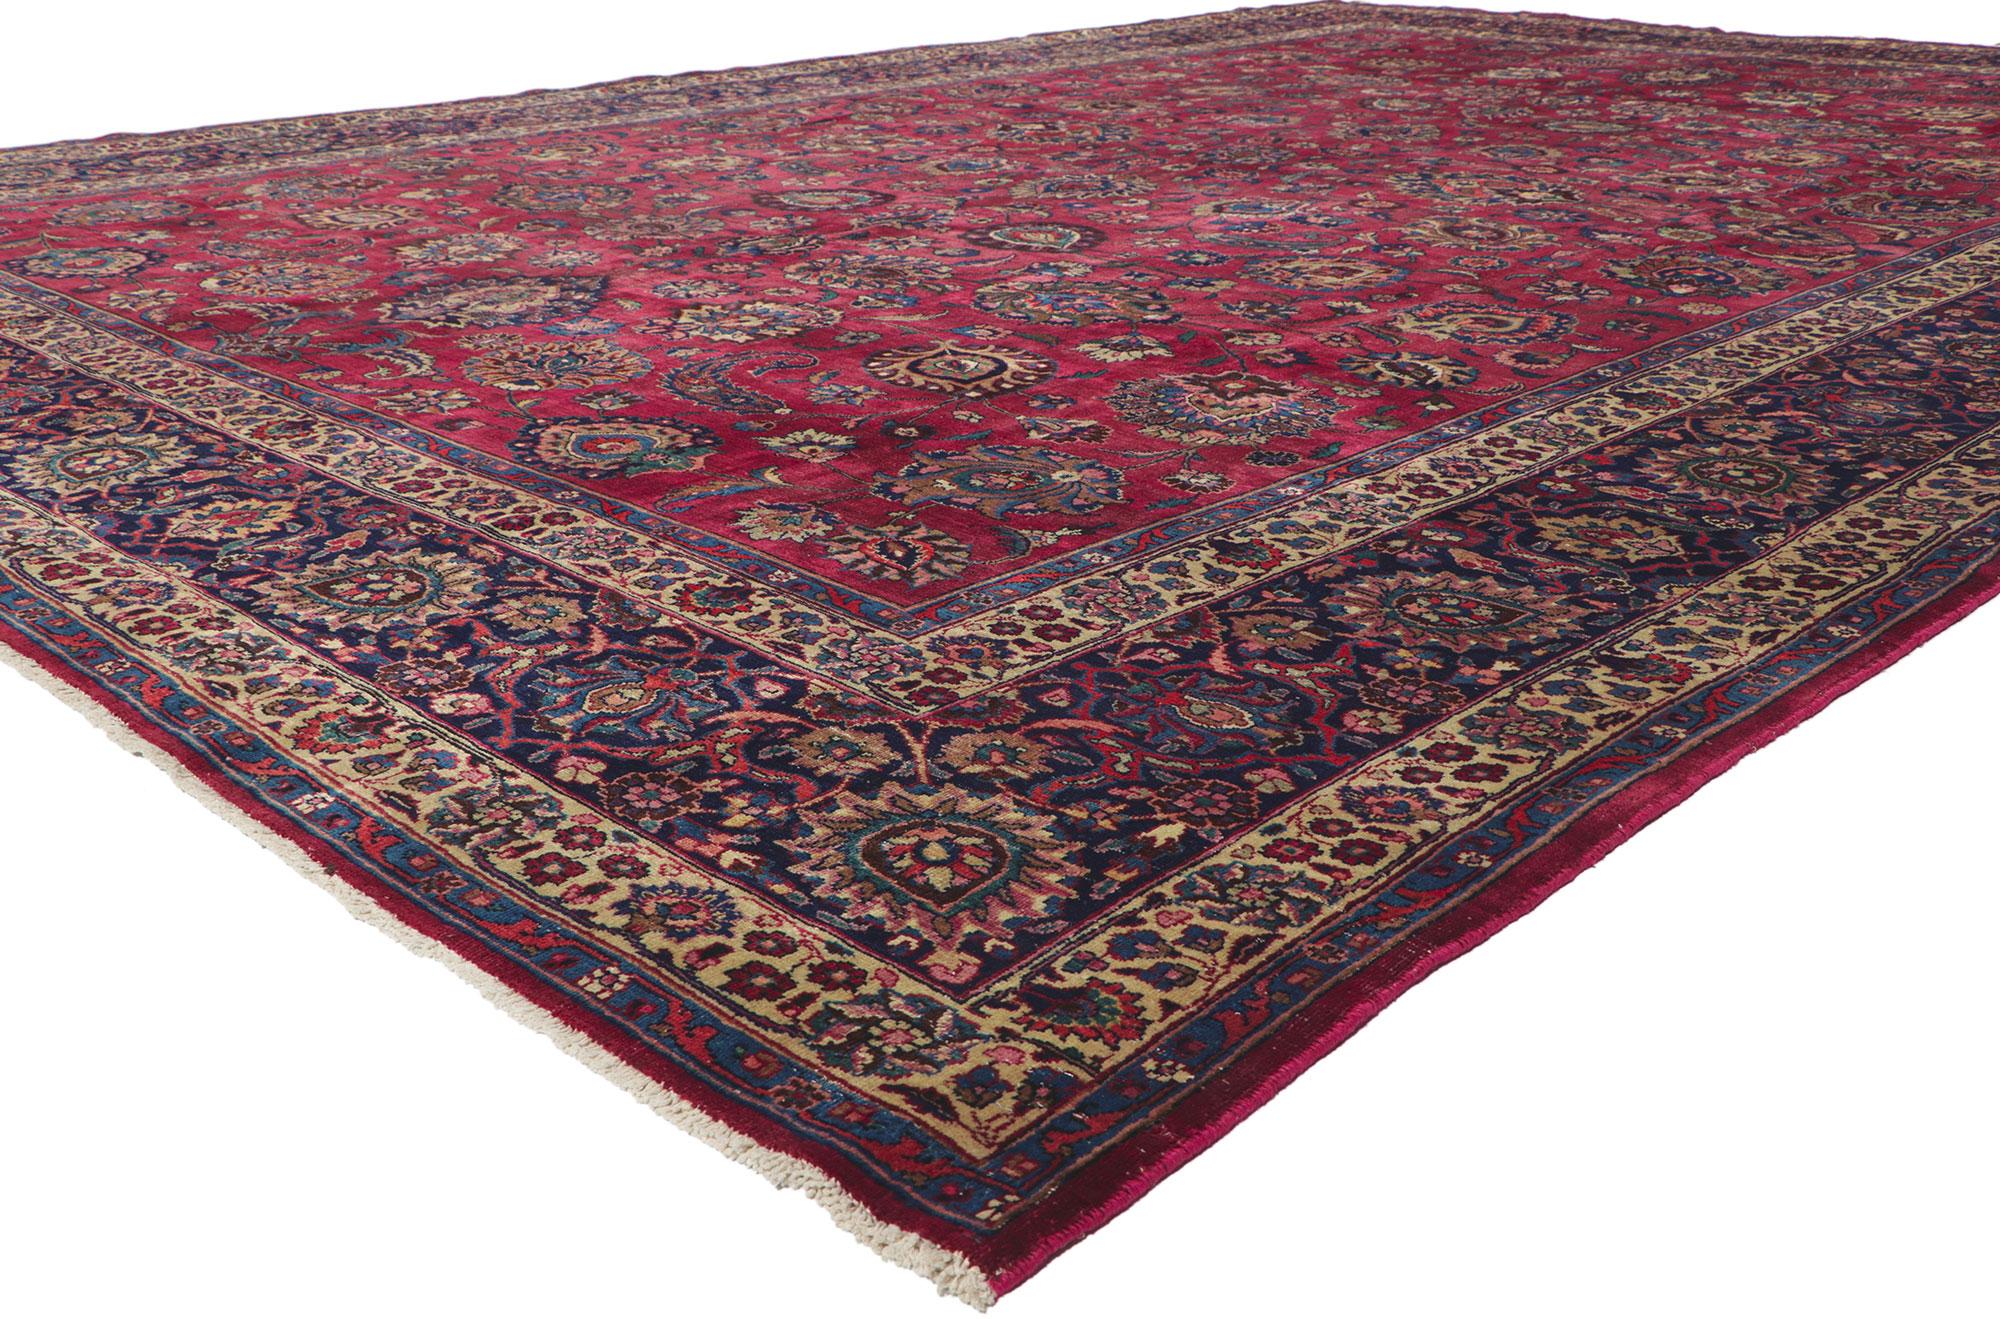 61201 Antique Persian Mashhad Rug 11'07 x 16'09. With its beguiling beauty and rich jewel-tones, this hand-knotted wool antique Persian Mashhad rug is poised to impress. The abrashed burgundy field features an all-over botanical pattern composed of